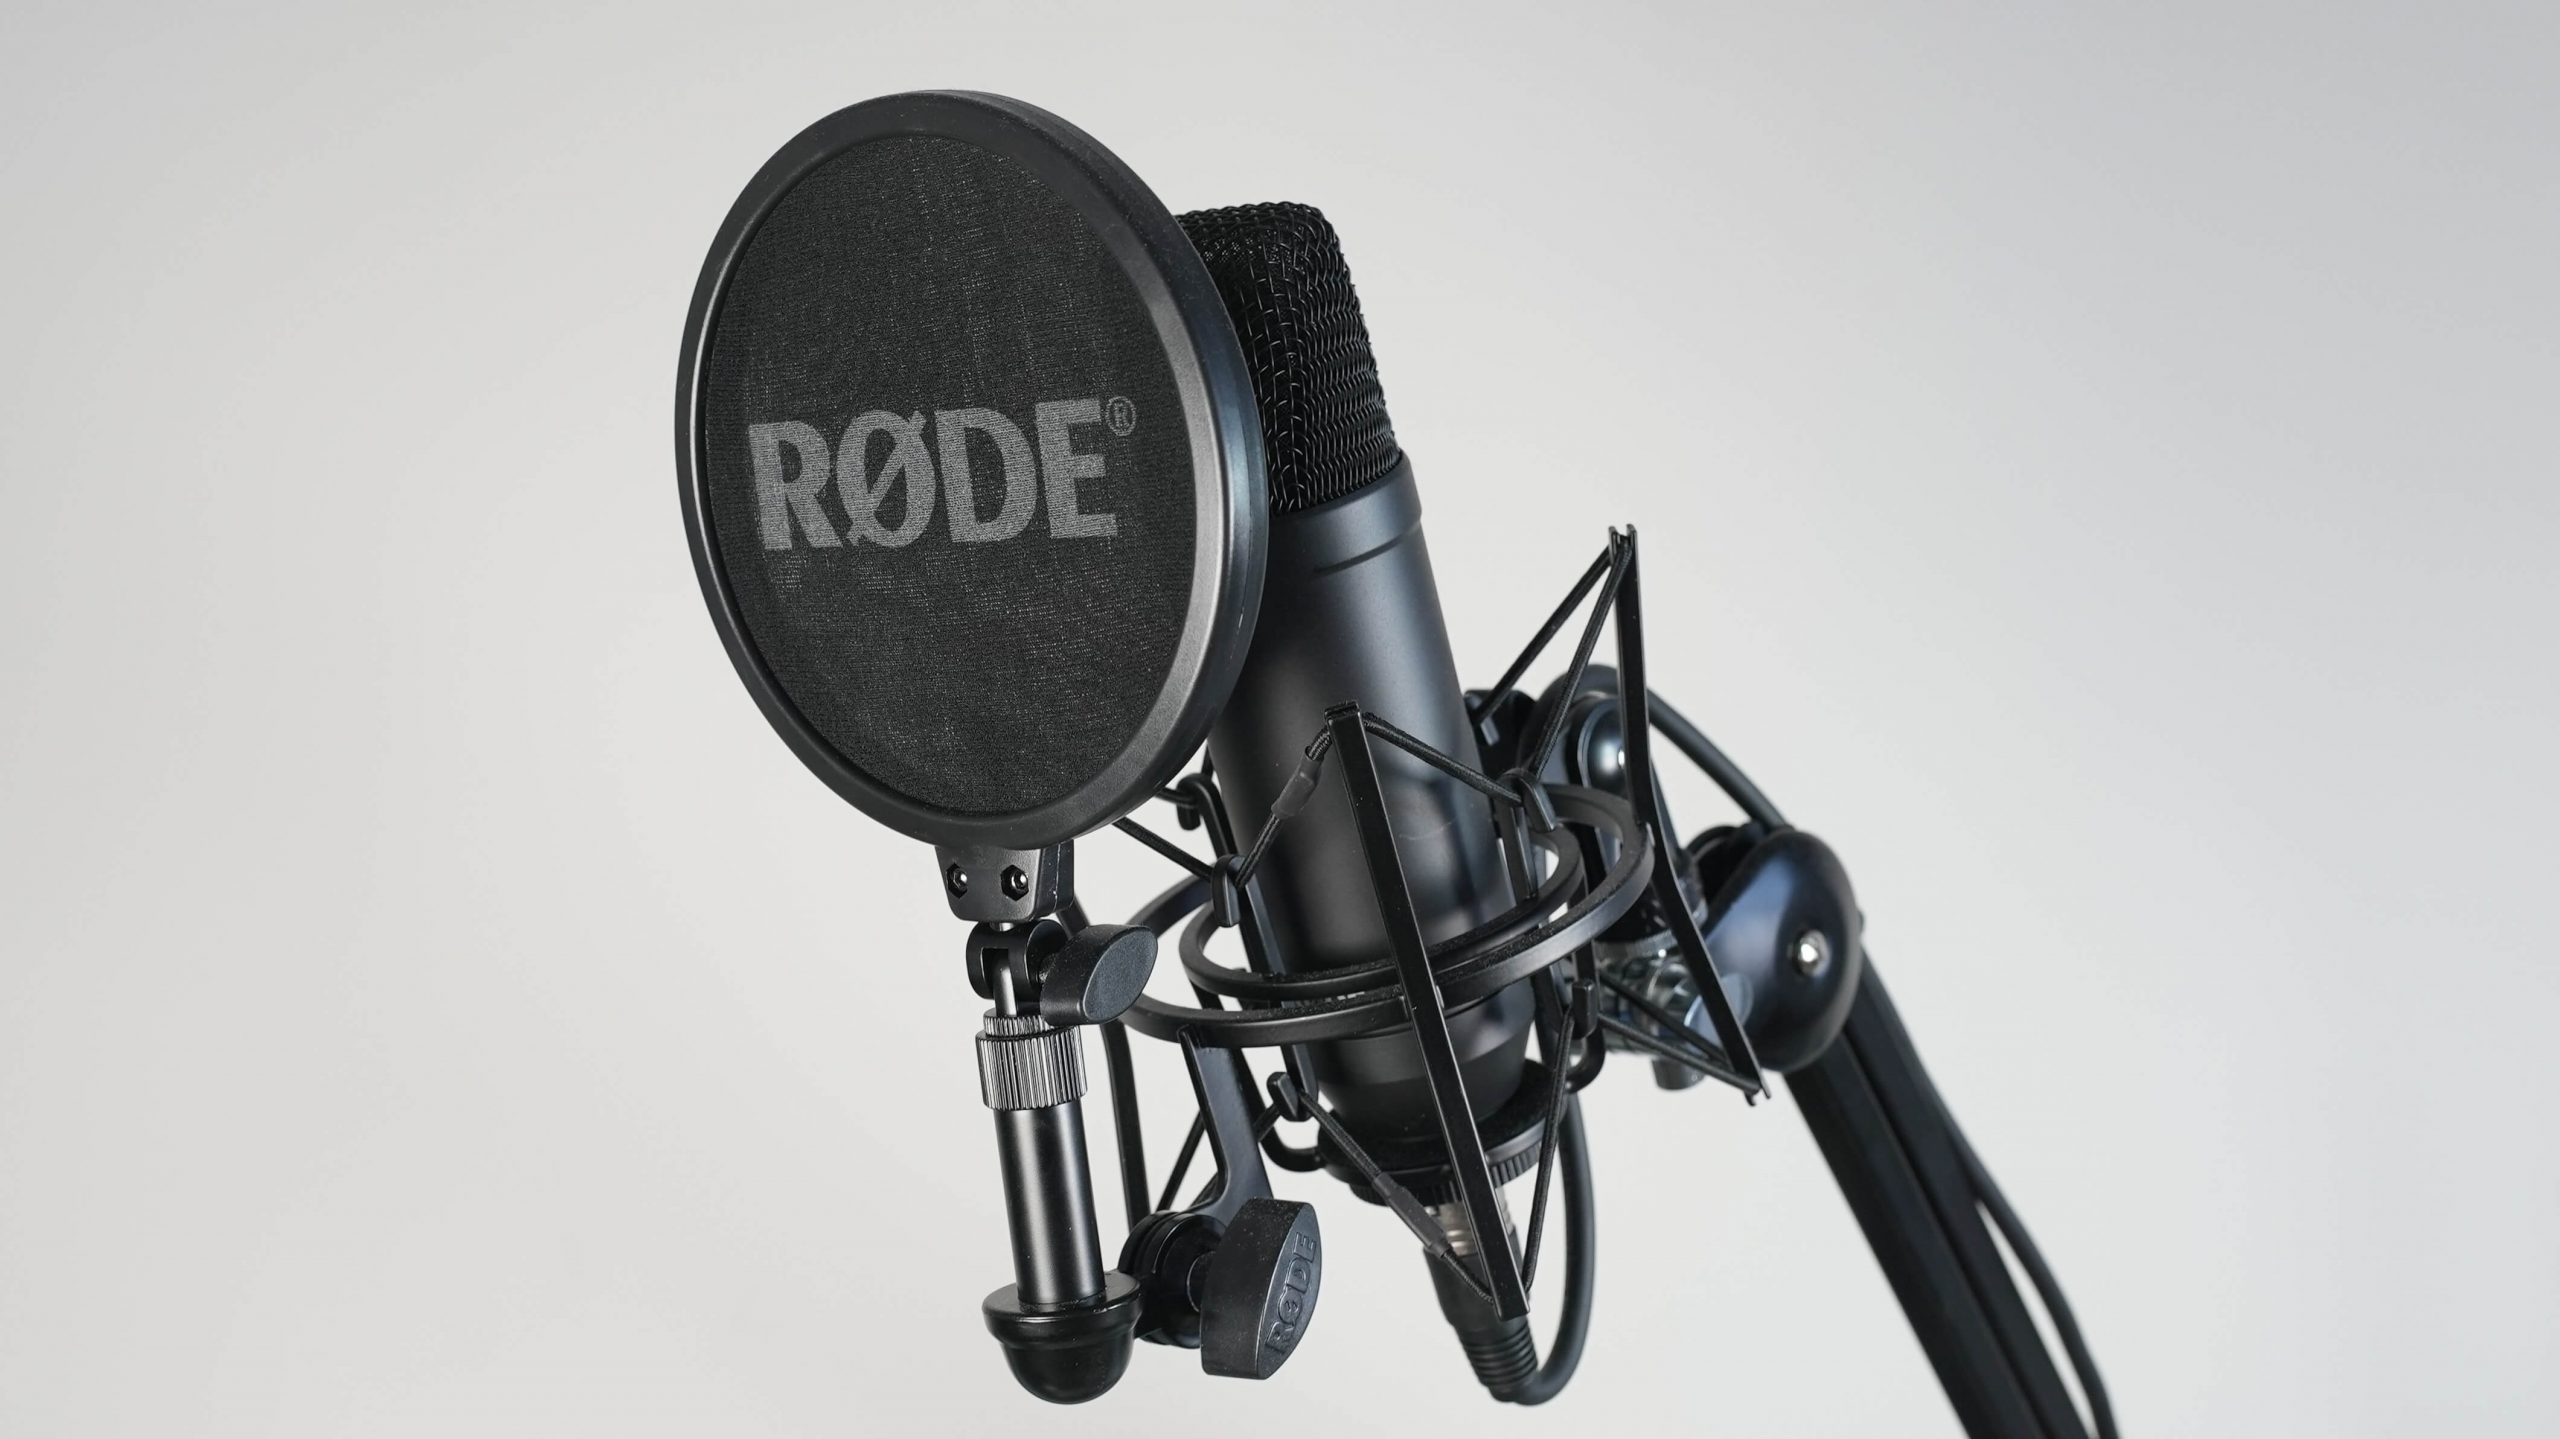 Types Of Microphones: Choosing The Right Mic For Your Sound Needs